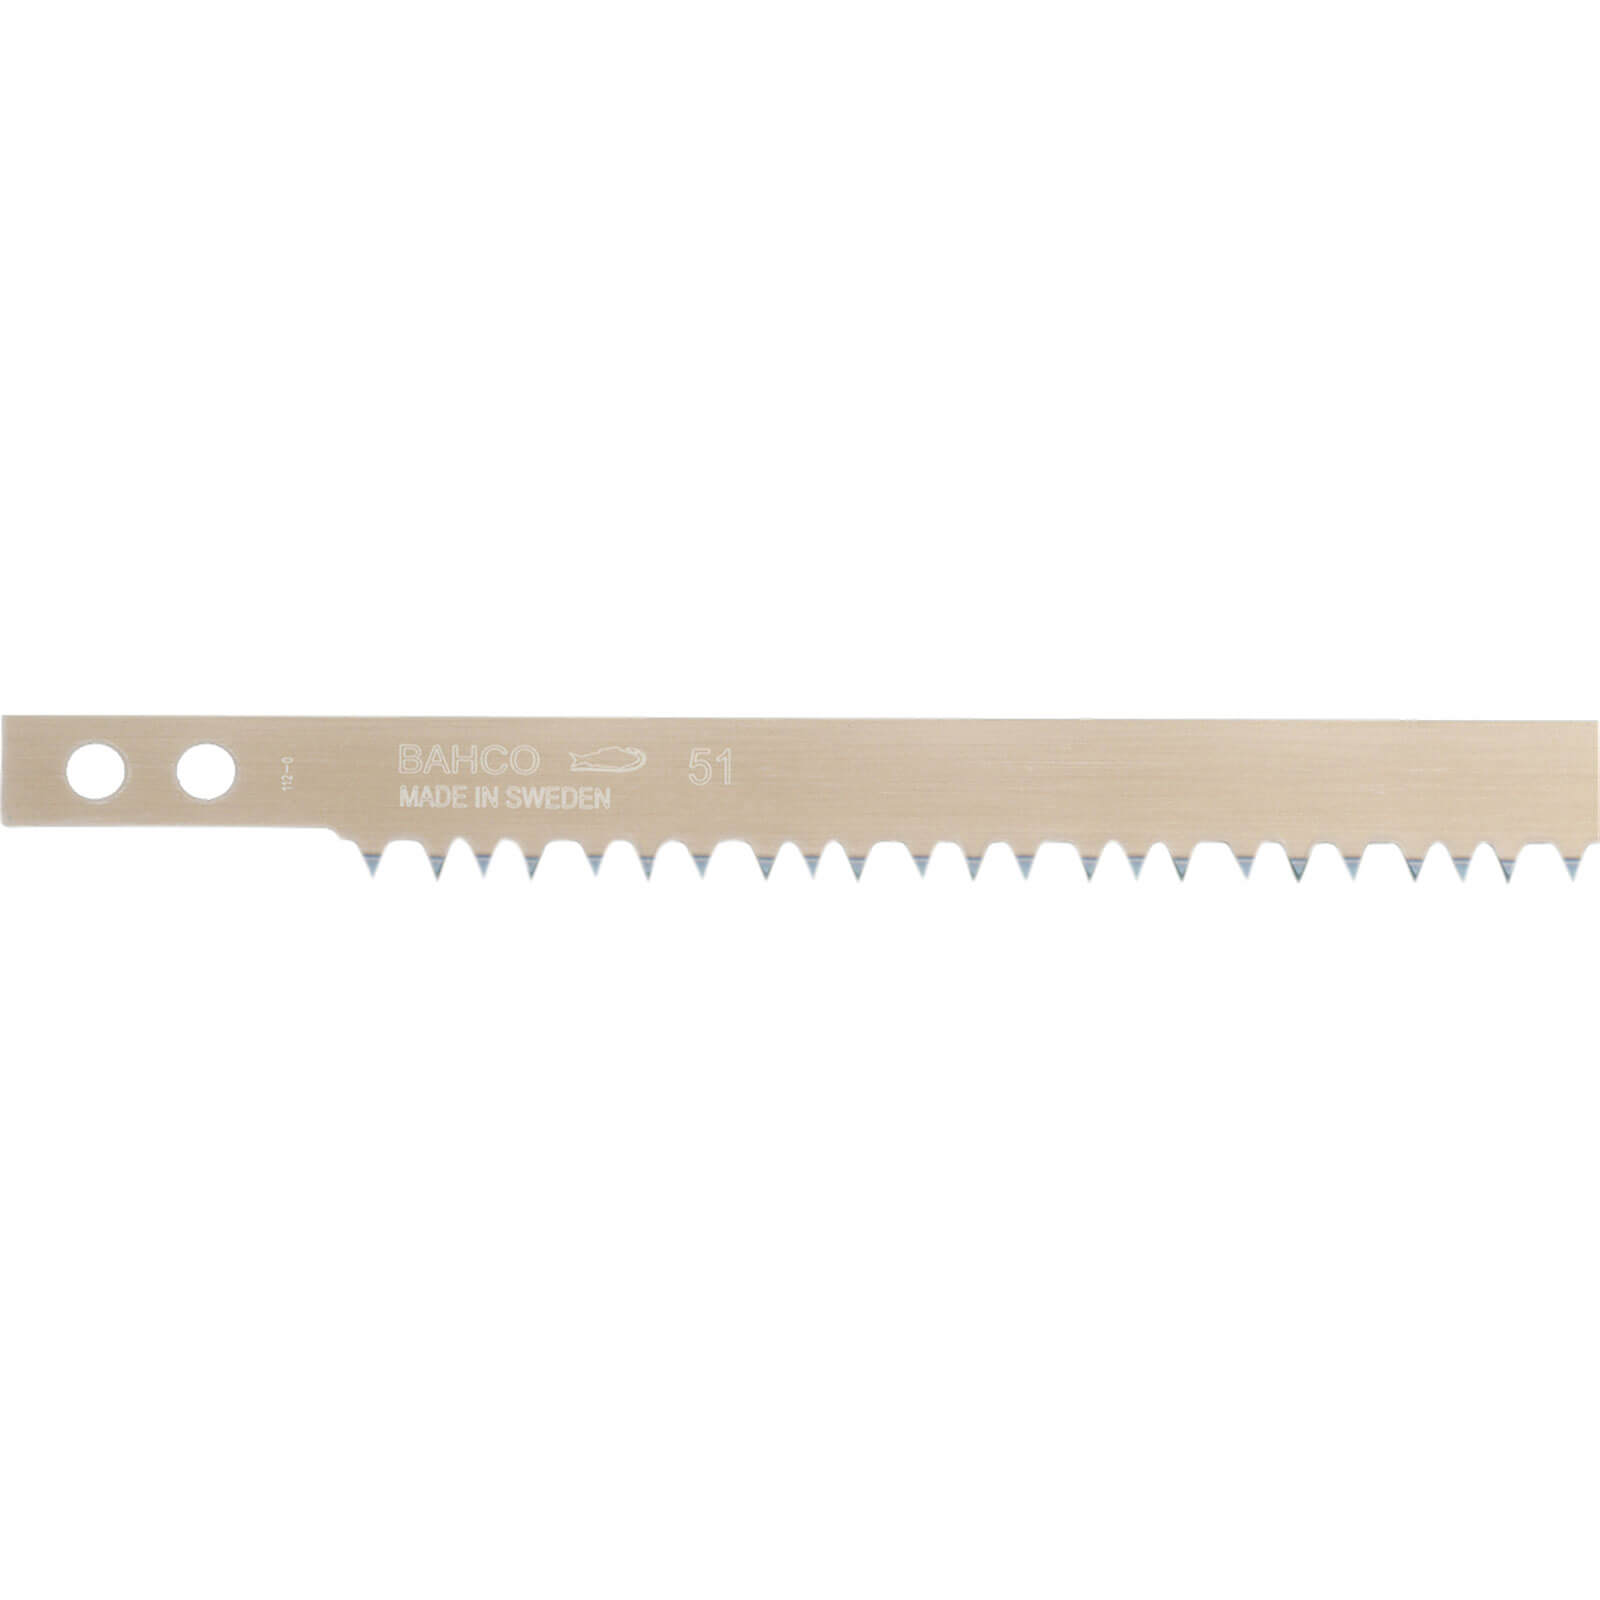 Bahco 12 Tooth Hard Point Bowsaw Blade 12" / 320mm All Purpose